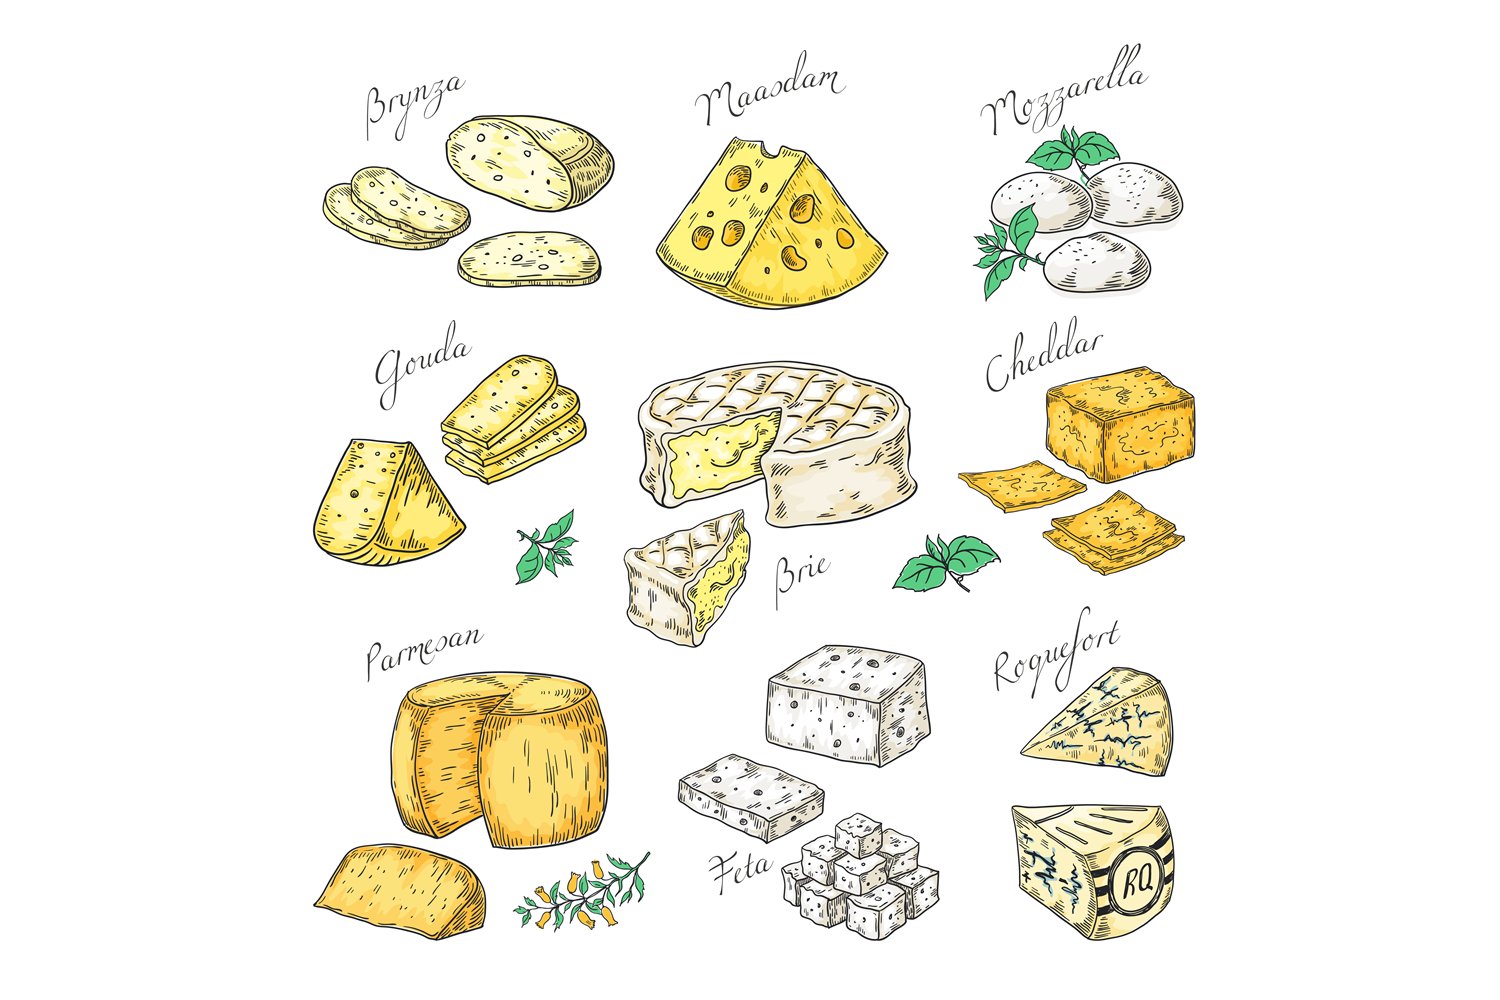 A pack of exquisite images of various types of cheese.